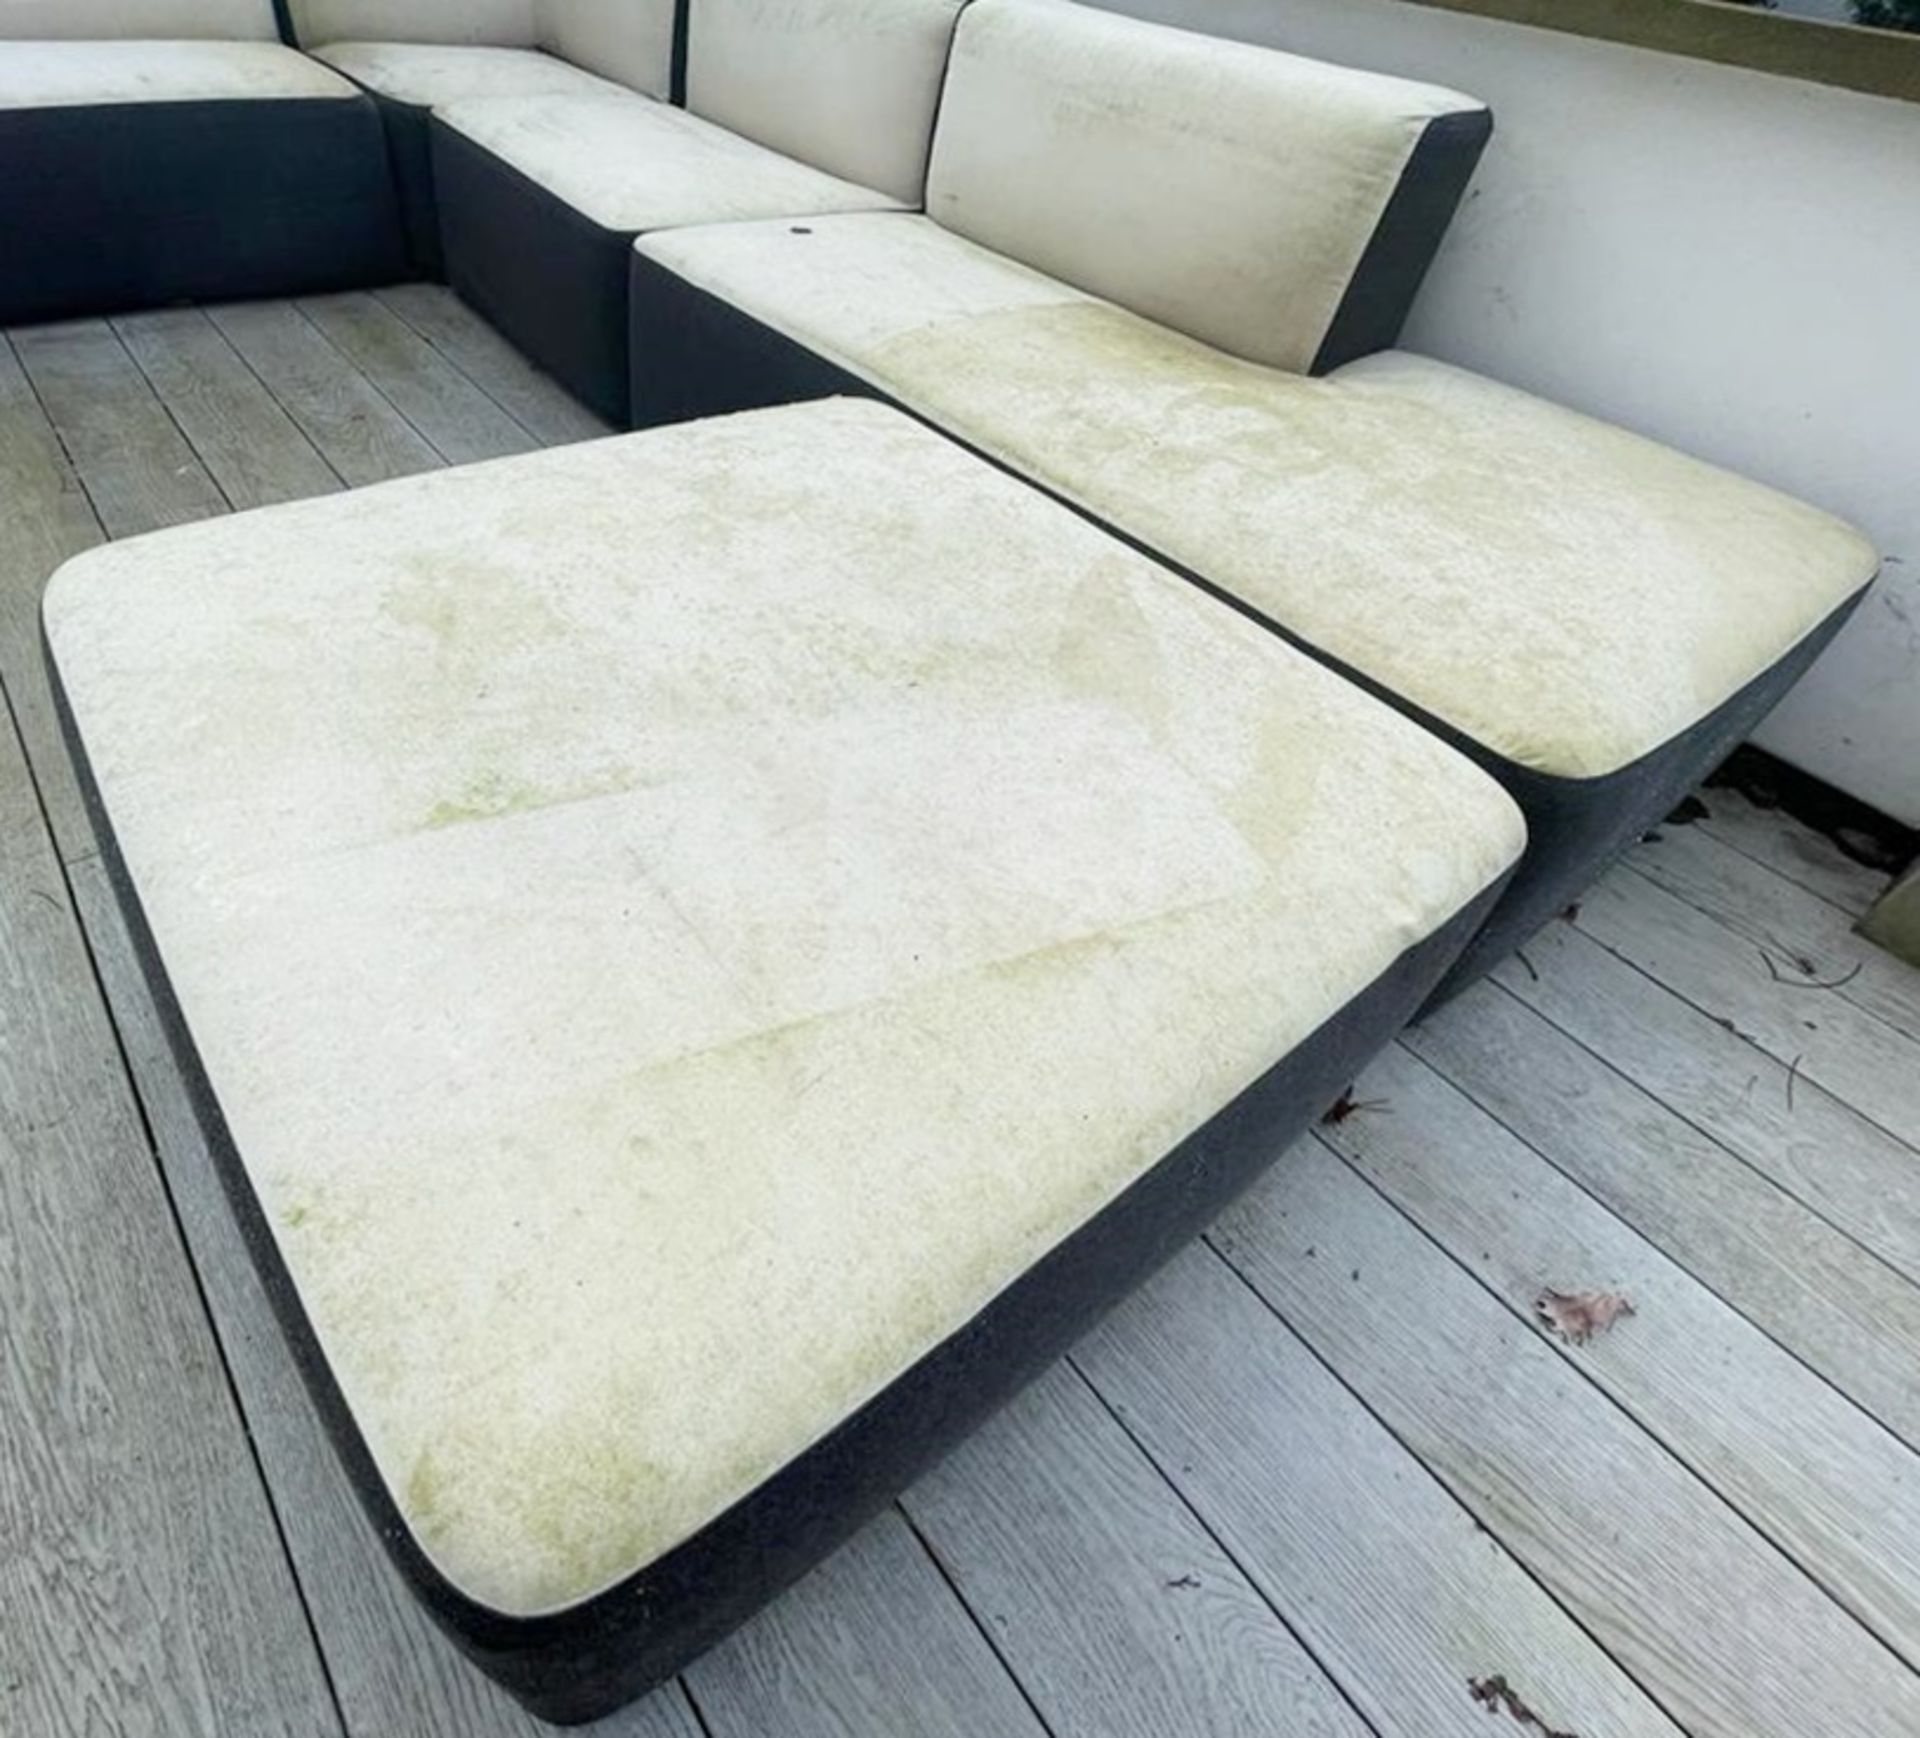 Large 7-Section VARASCHIN Modular Outdoor Corner Sofa Seating - Dimensions To Follow - From an - Image 11 of 12